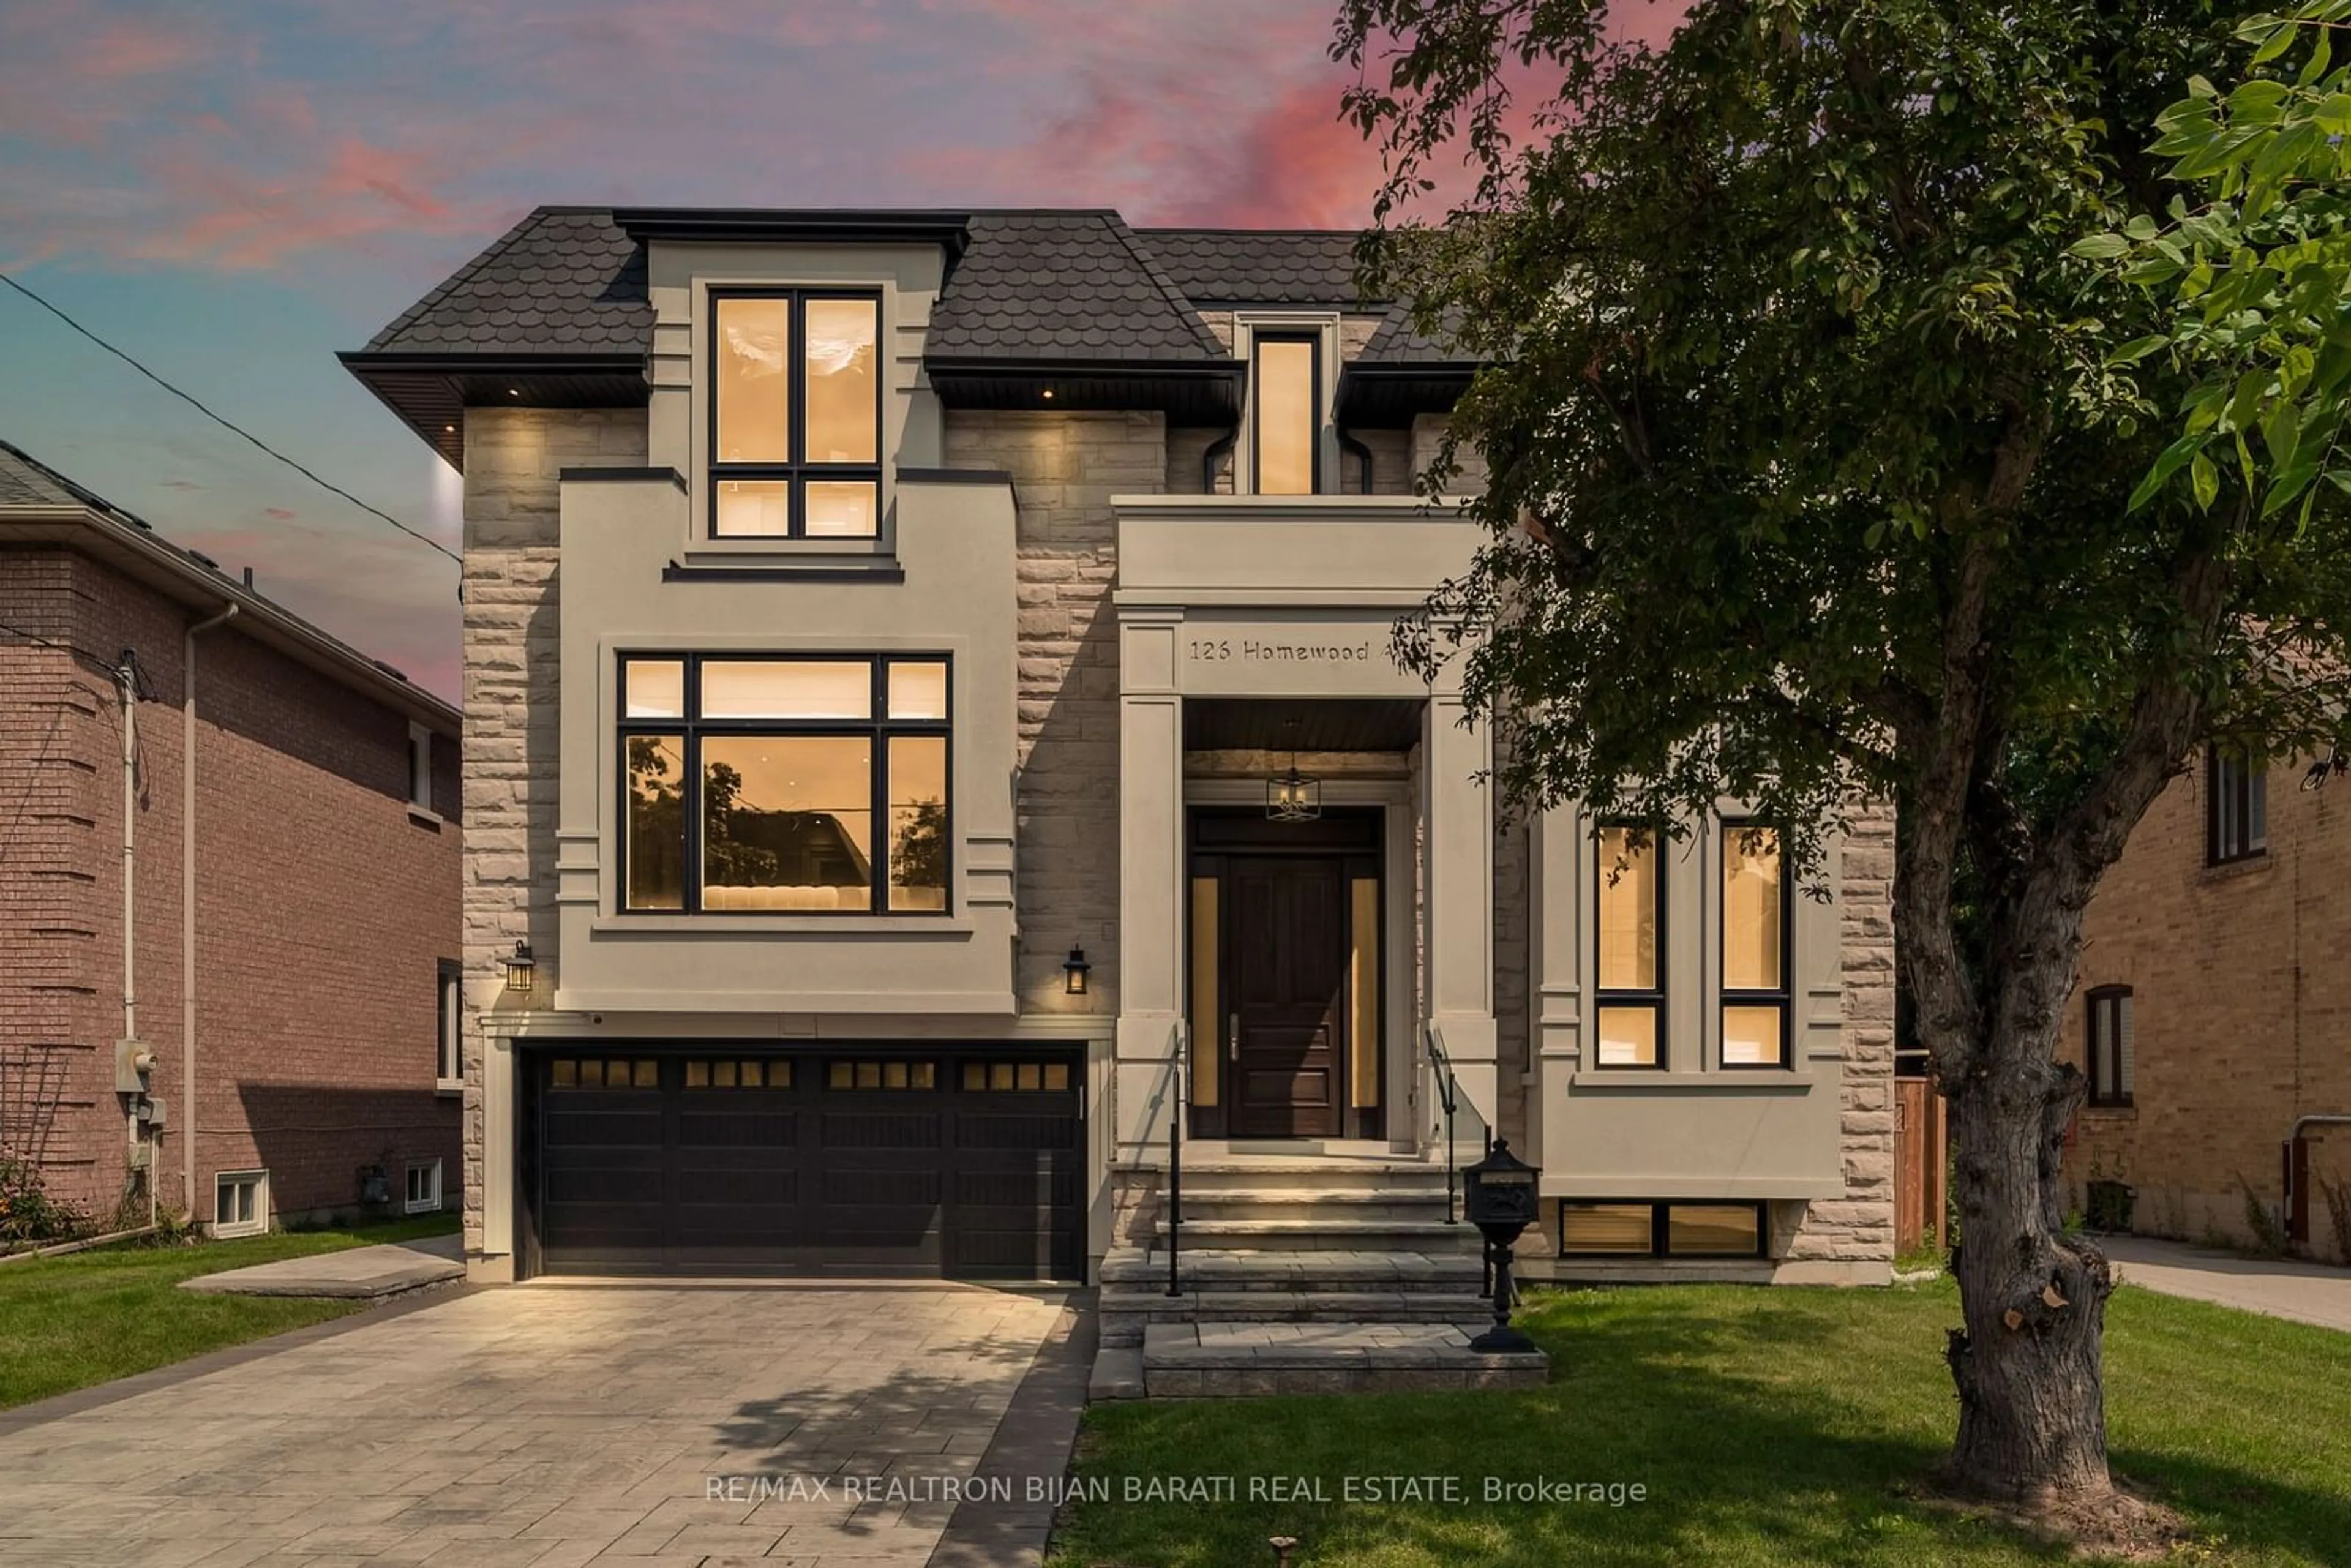 Home with brick exterior material for 126 Homewood Ave, Toronto Ontario M2M 1K3